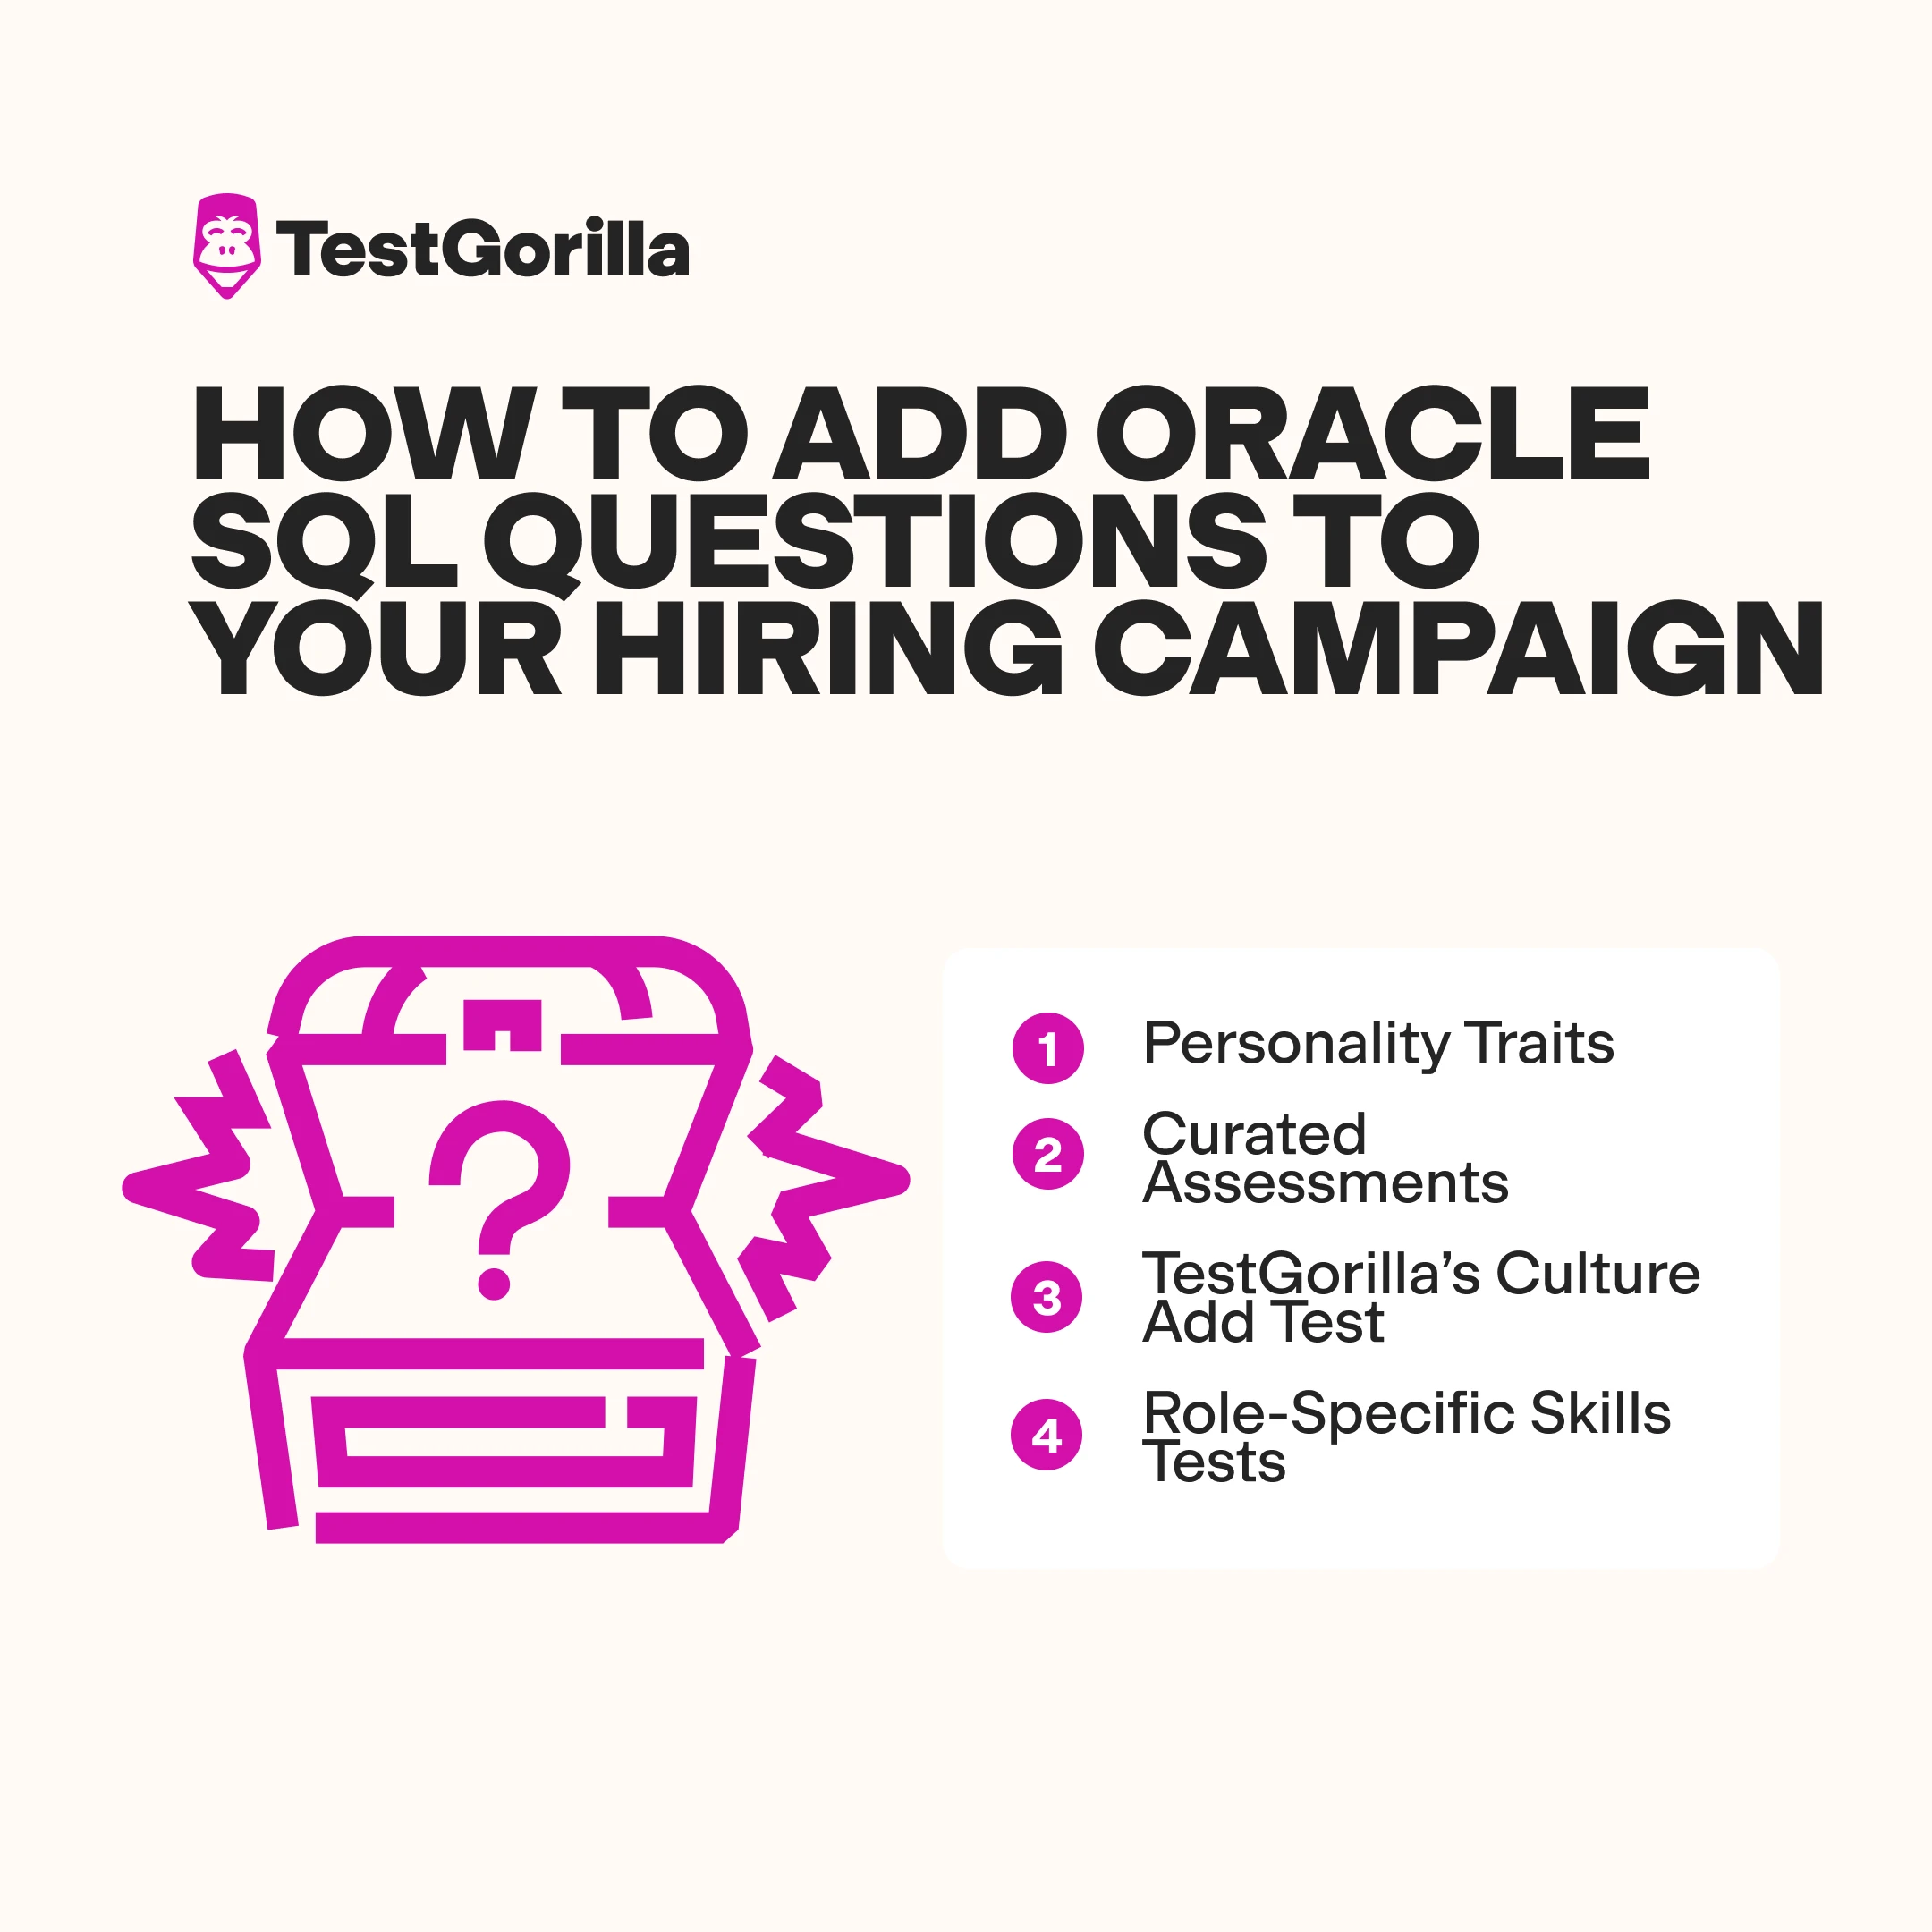 How to add Oracle SQL questions to your hiring campaign graphic